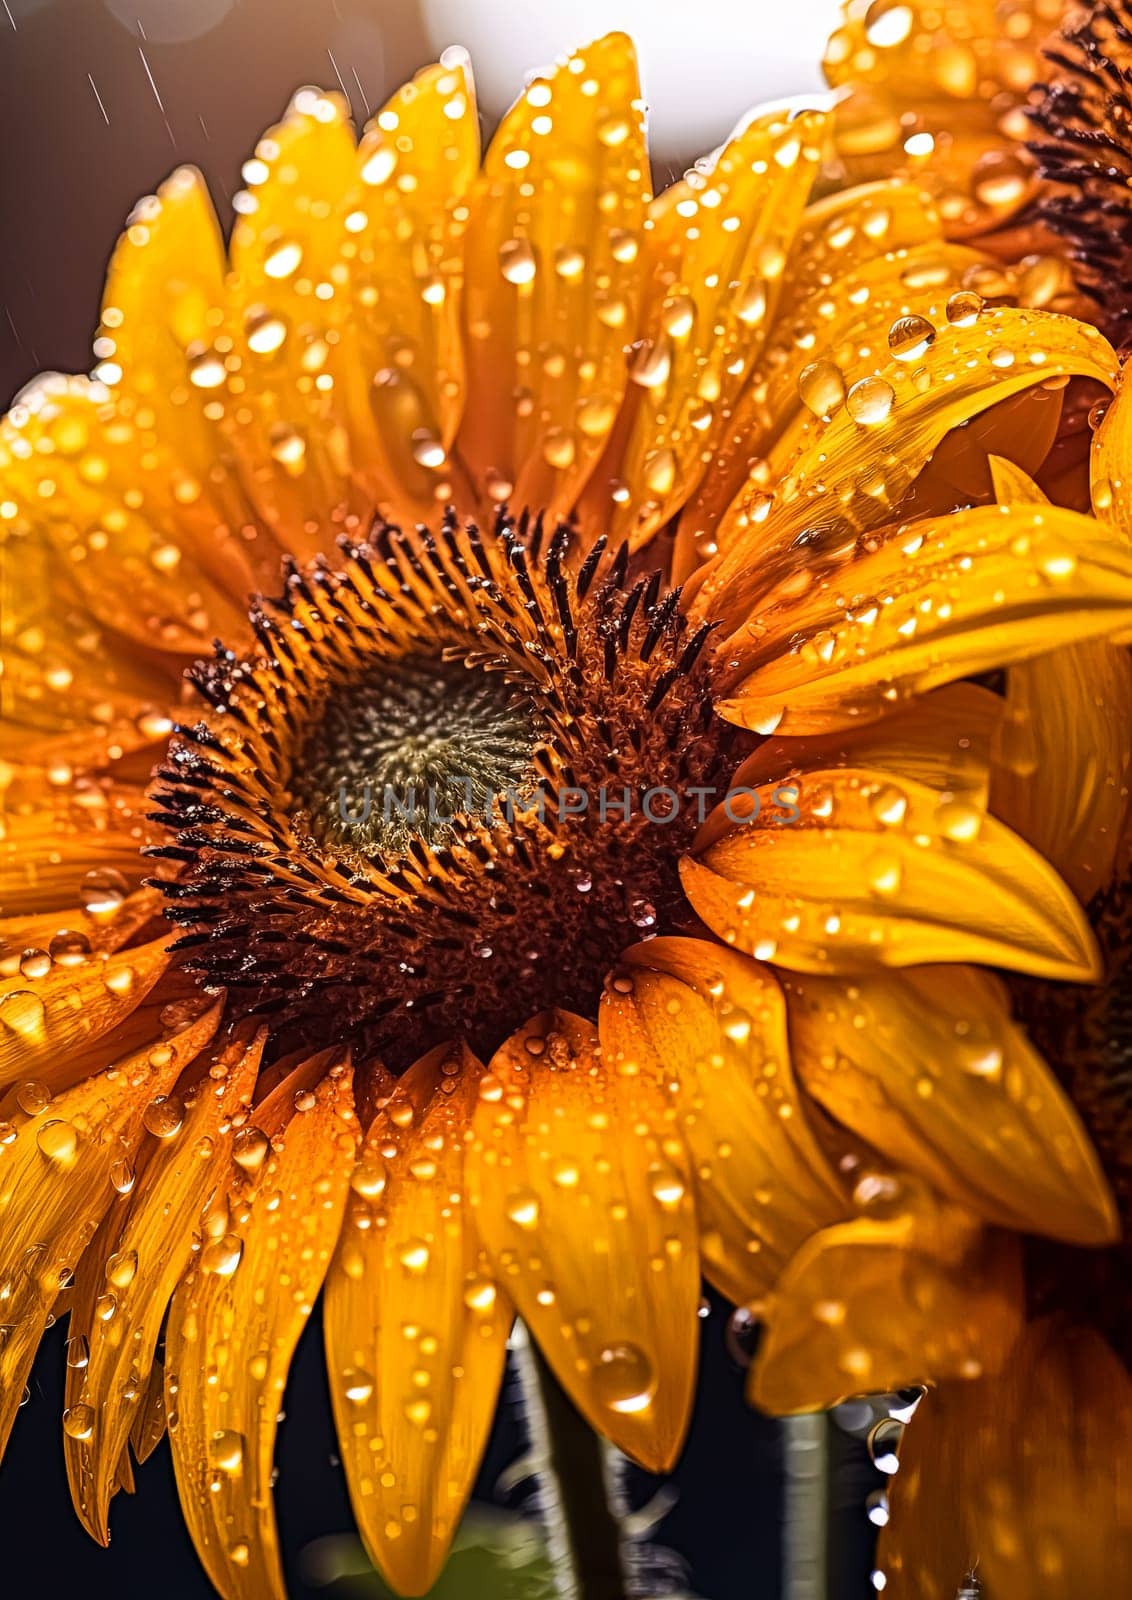 A close up of a yellow flower with water droplets on it. The droplets are scattered all over the flower, giving it a dreamy and ethereal appearance. The flower is the main focus of the image